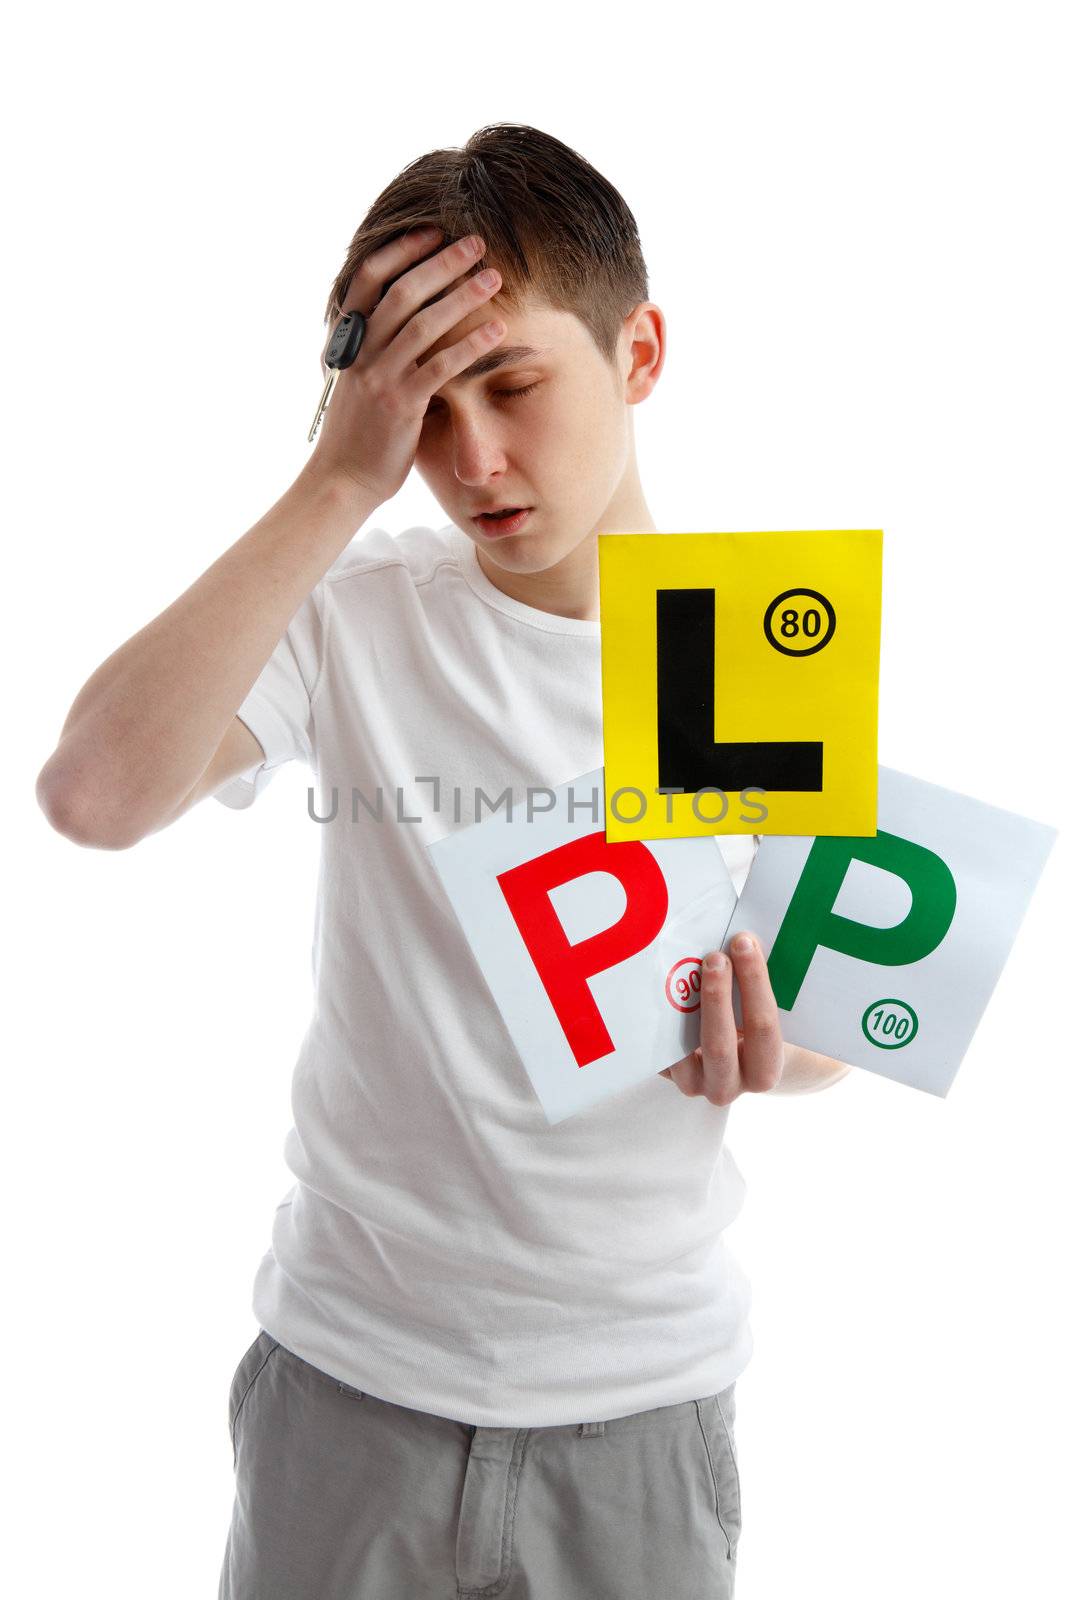 Teenage boy holding L and P plate driving licence signs for car and looking forlorn.  He may need to take more expert driving tuition to avoid another fail in driving examination.